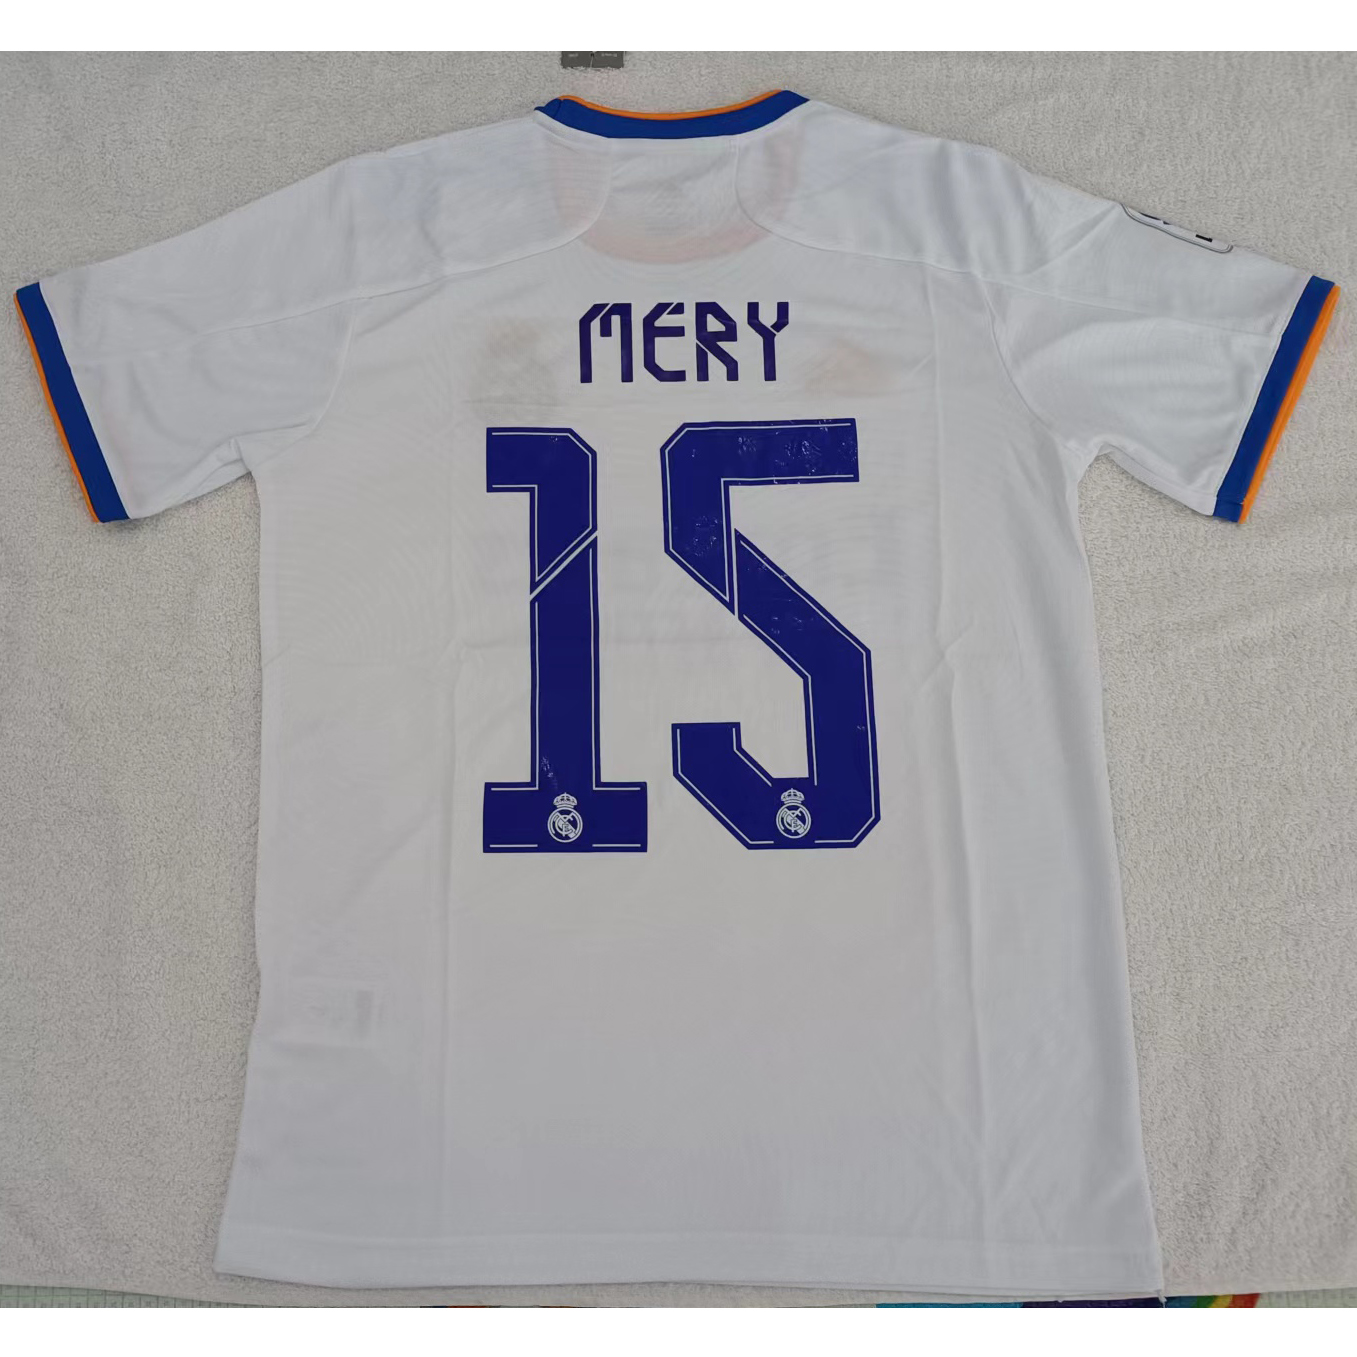 220853 Max Maillot Real Madrid MERY 15 Blanc TailleS